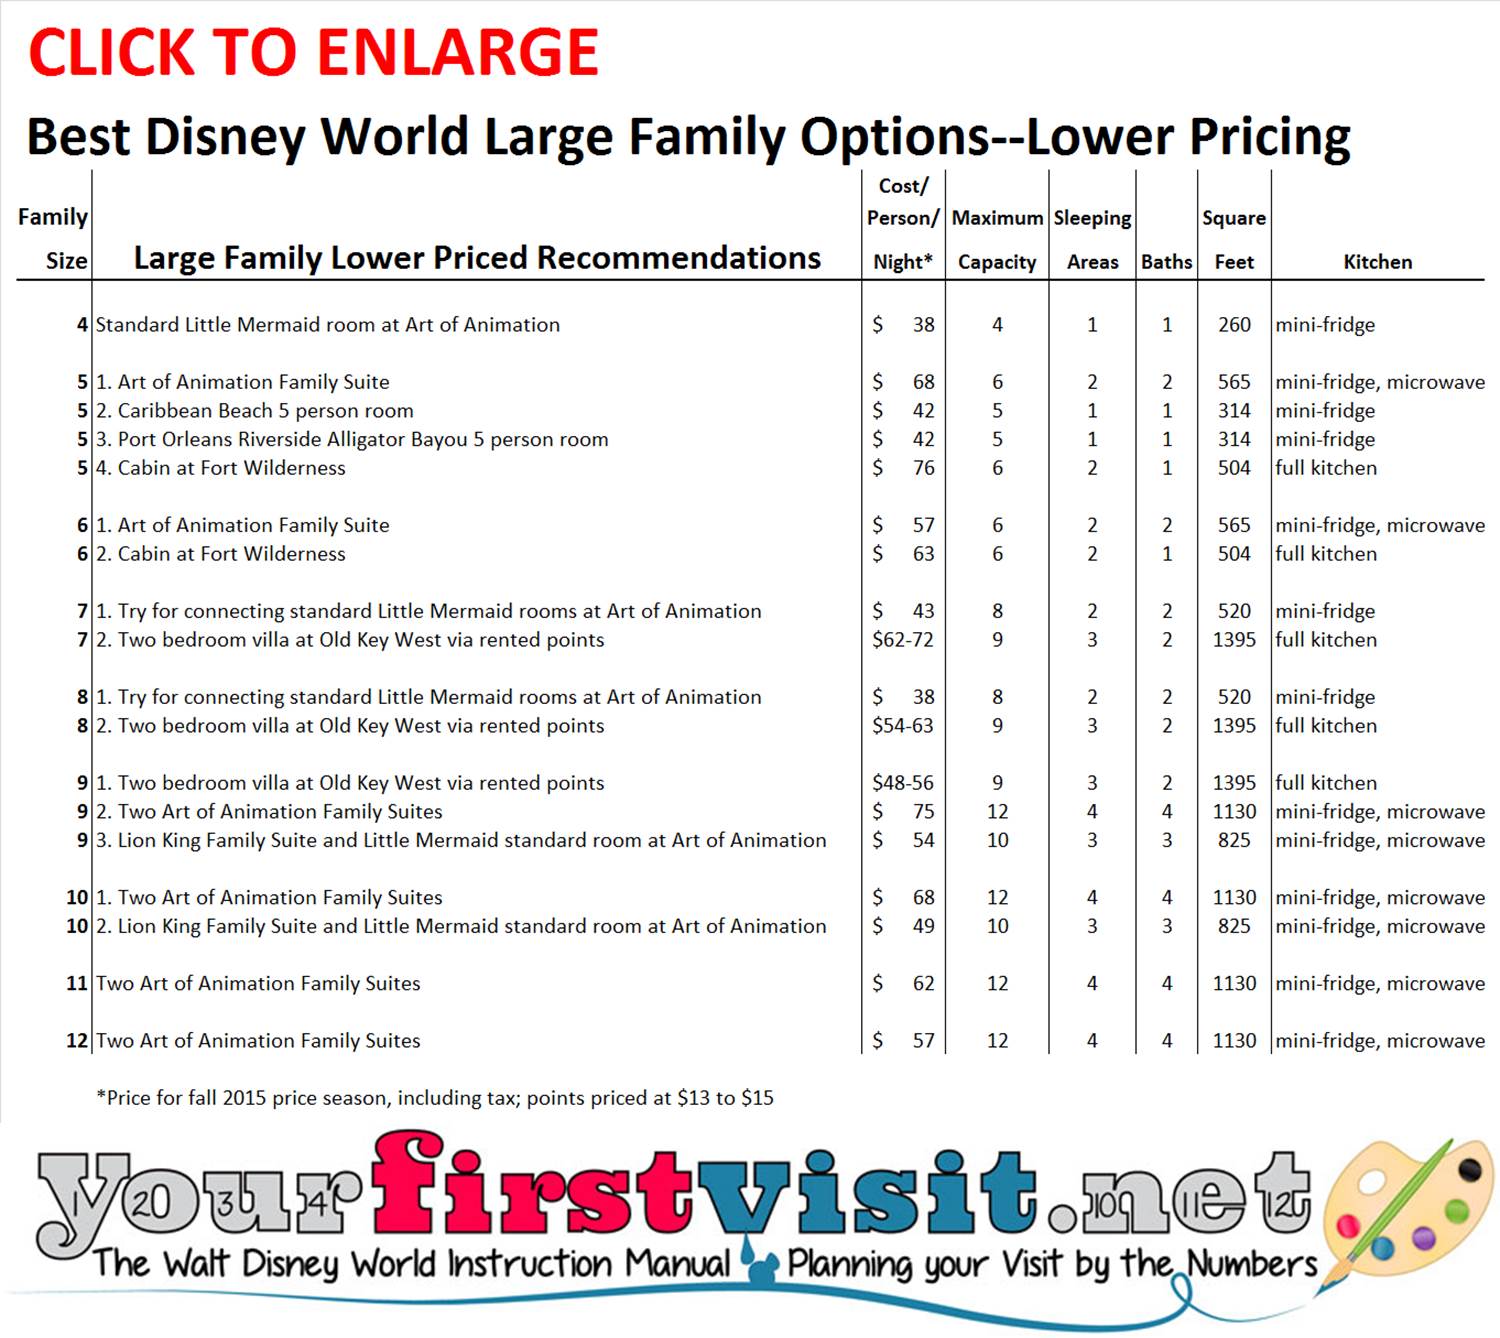 Disney World Lower Priced Large Family Recommendations from yourfirstvisit.net